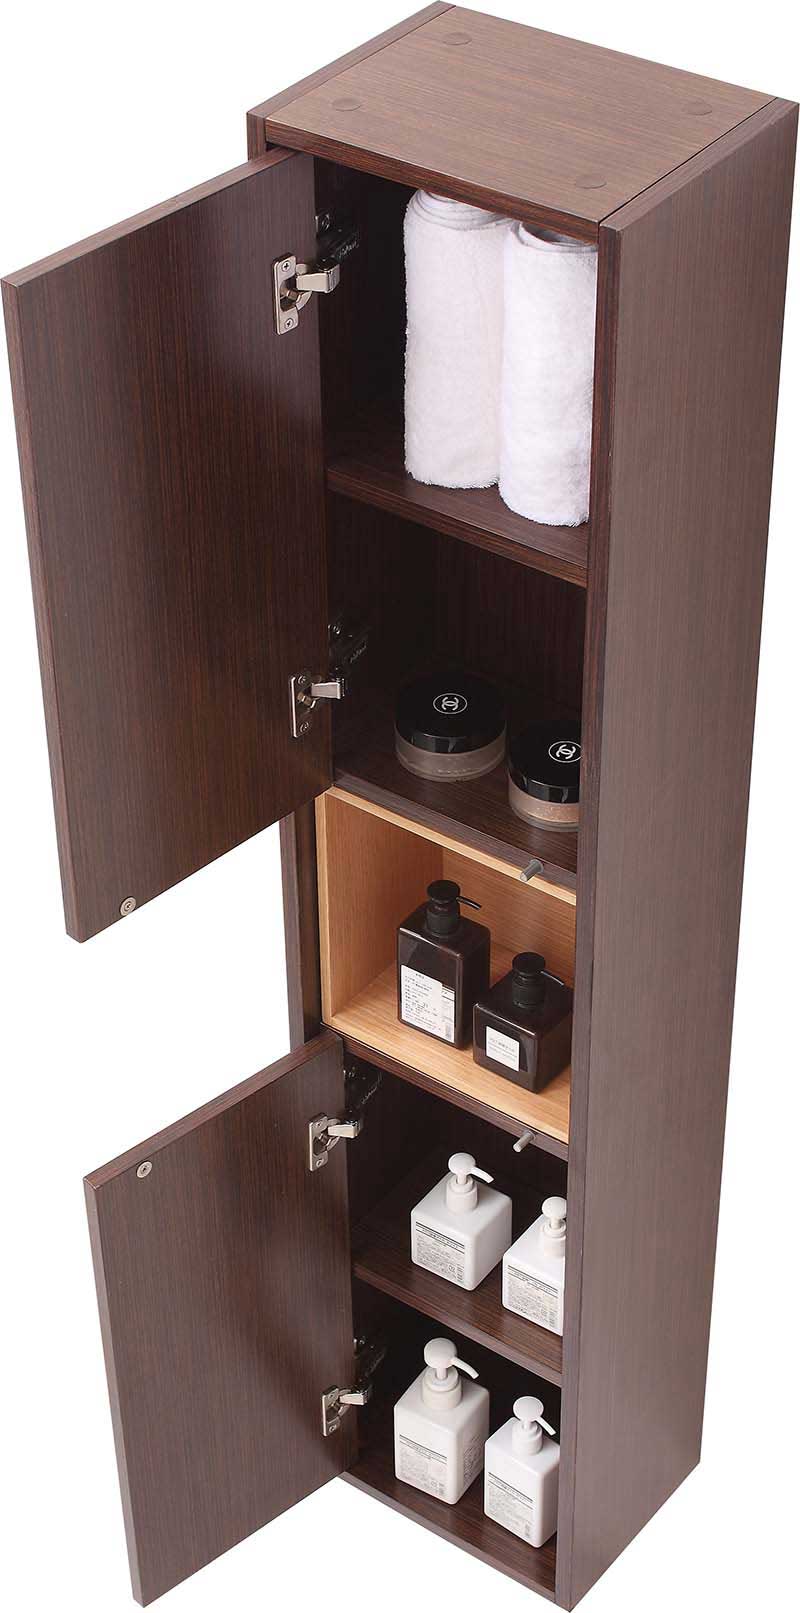 Avanity Sonoma 12 in. Wall Cabinet SONOMA-WC12-IW 4